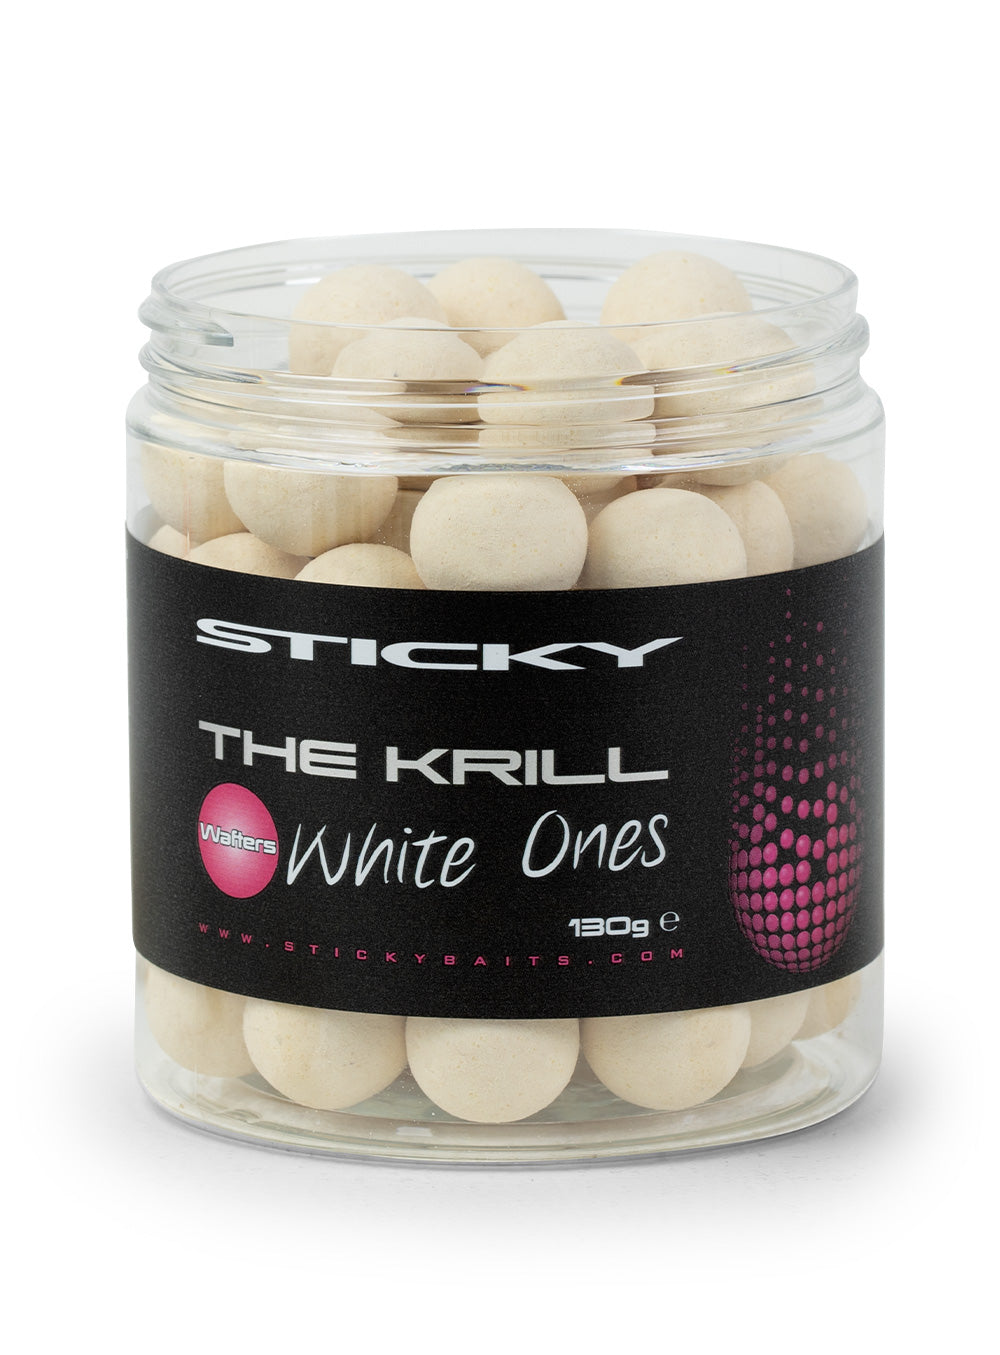 Sticky Baits Wafters 16mm 130g